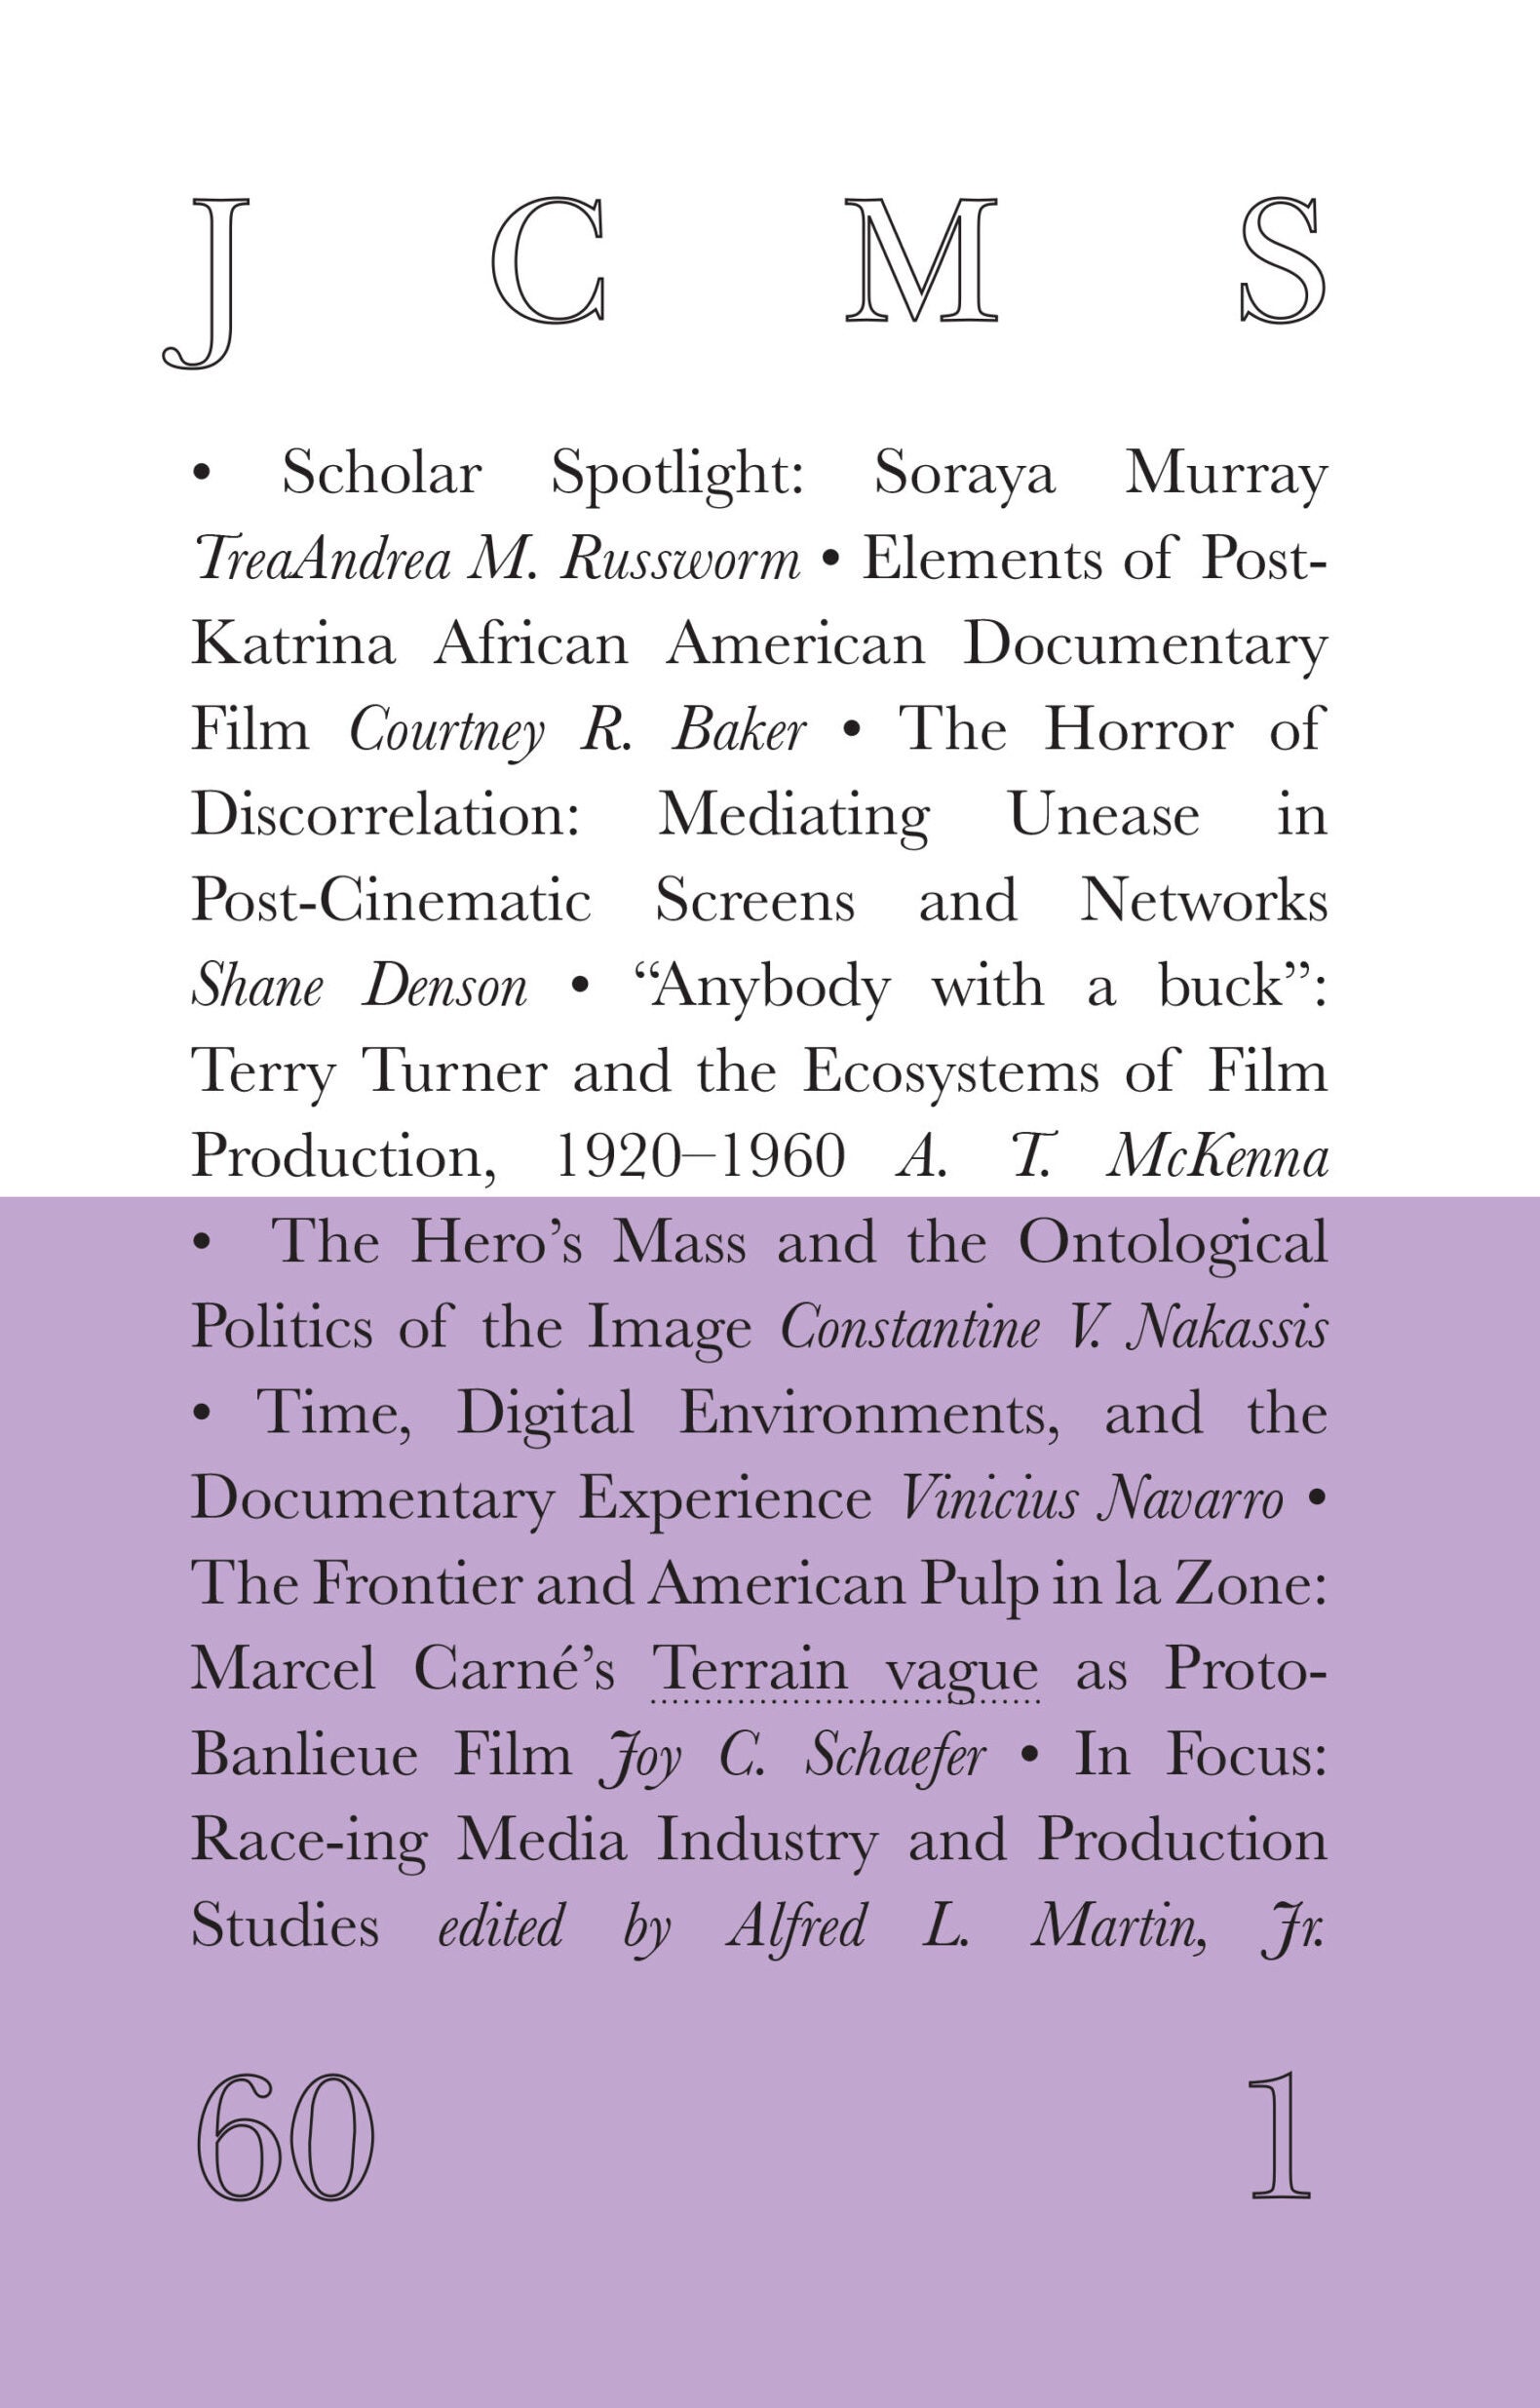 Half white and half lavender, the cover of JCMS: Journal of Cinema and Media Studies features the title and author of each article included in each issue.